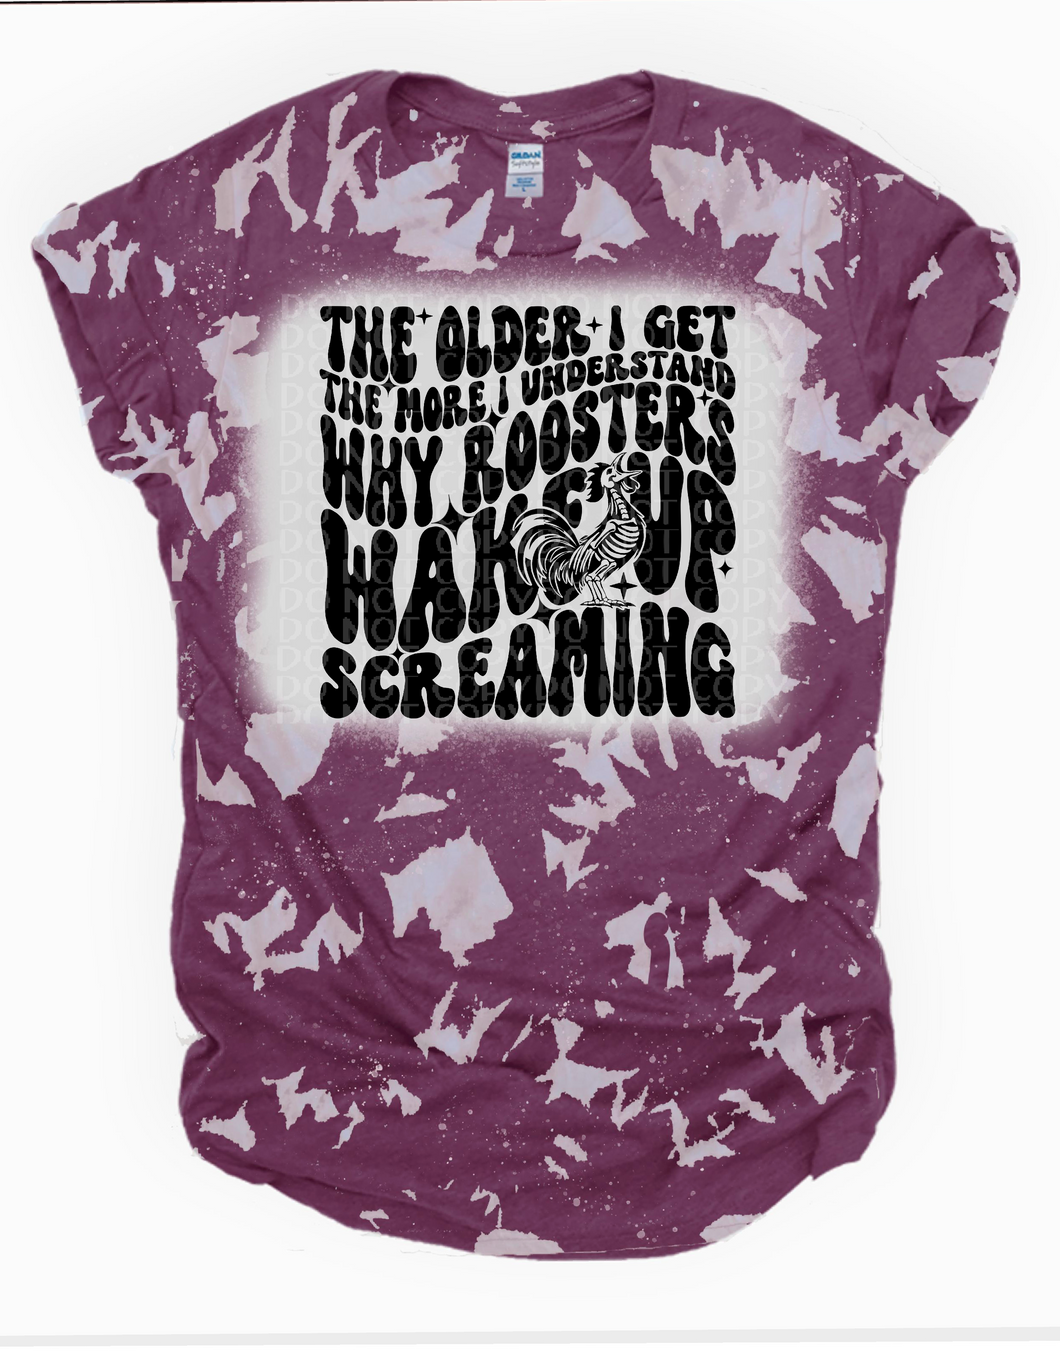 Roosters wake up Screaming Bleached tee